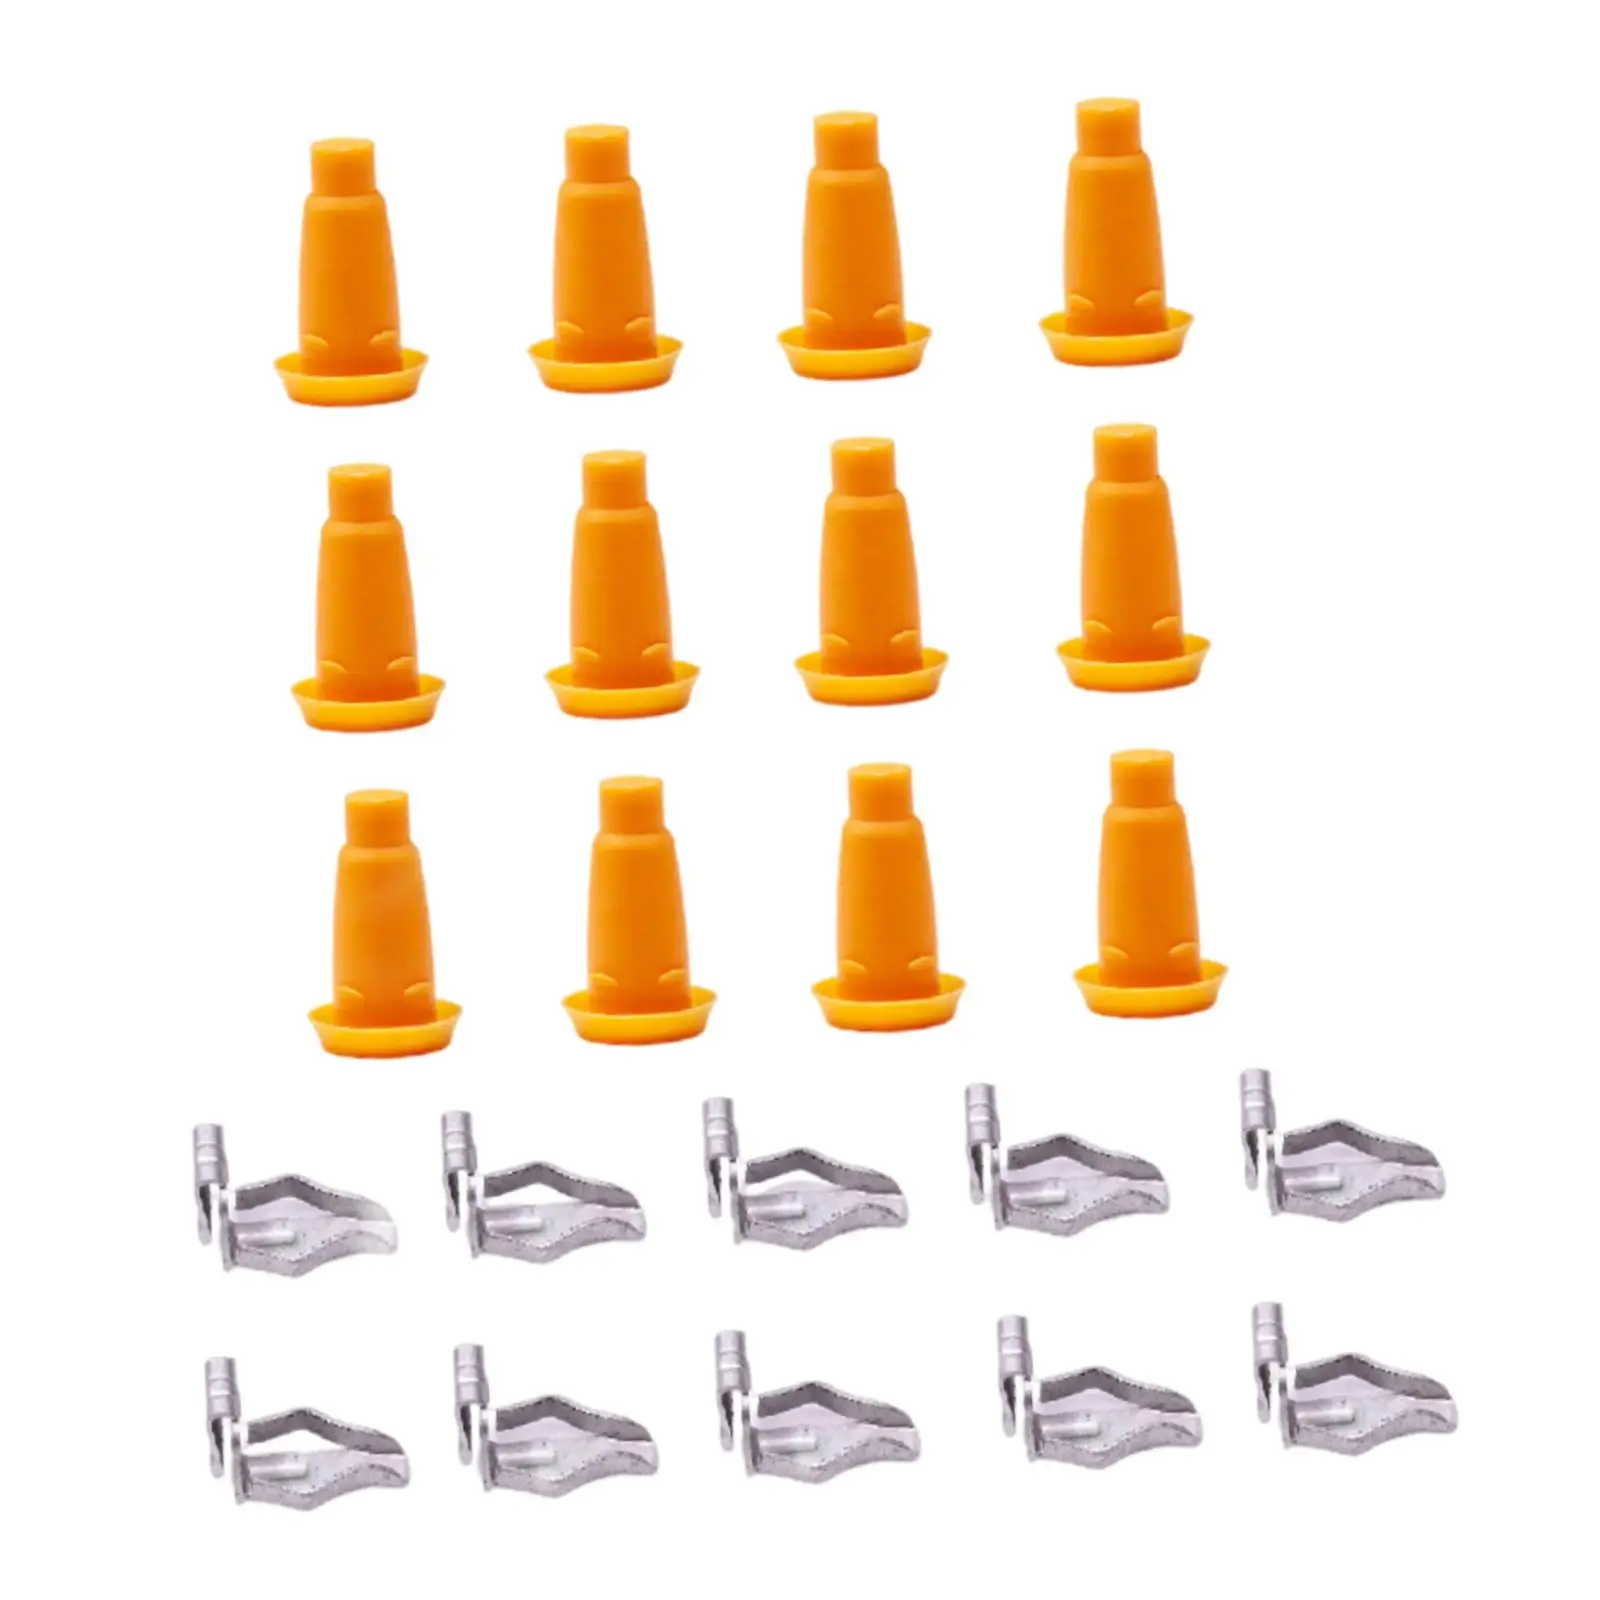 24Pcs Door Panel Frame Plugs & Clips Replacement 4500027 Repair Kit for Chevy Camaro Corvair Chevelle Fullsize Professional